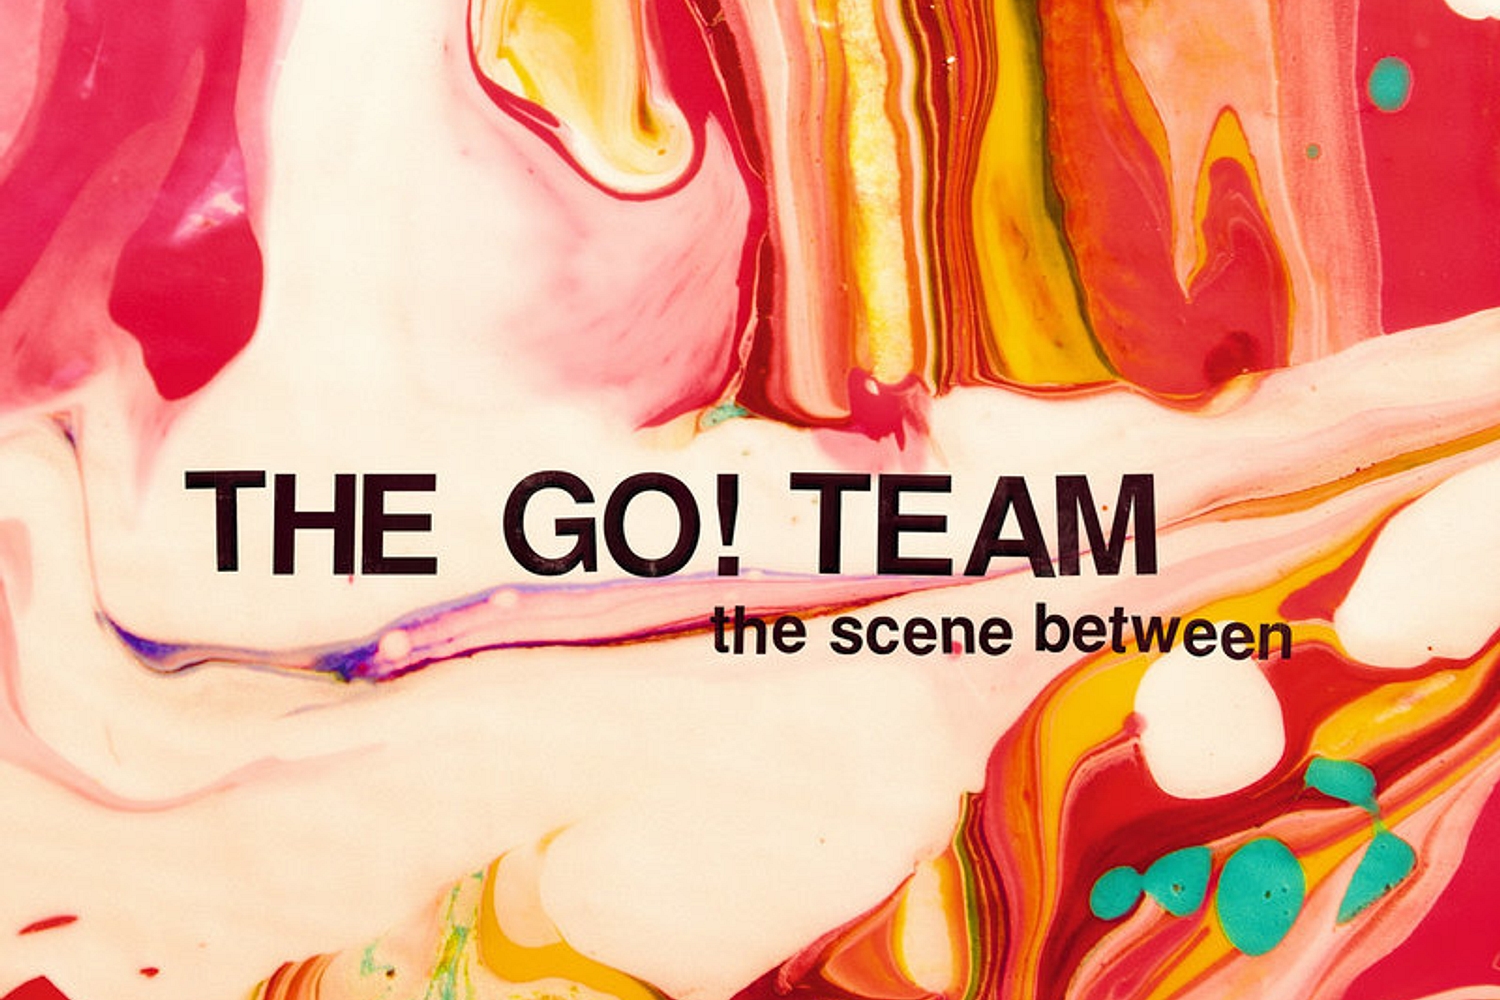 The Go! Team offer up new track ‘What D’You Say?’